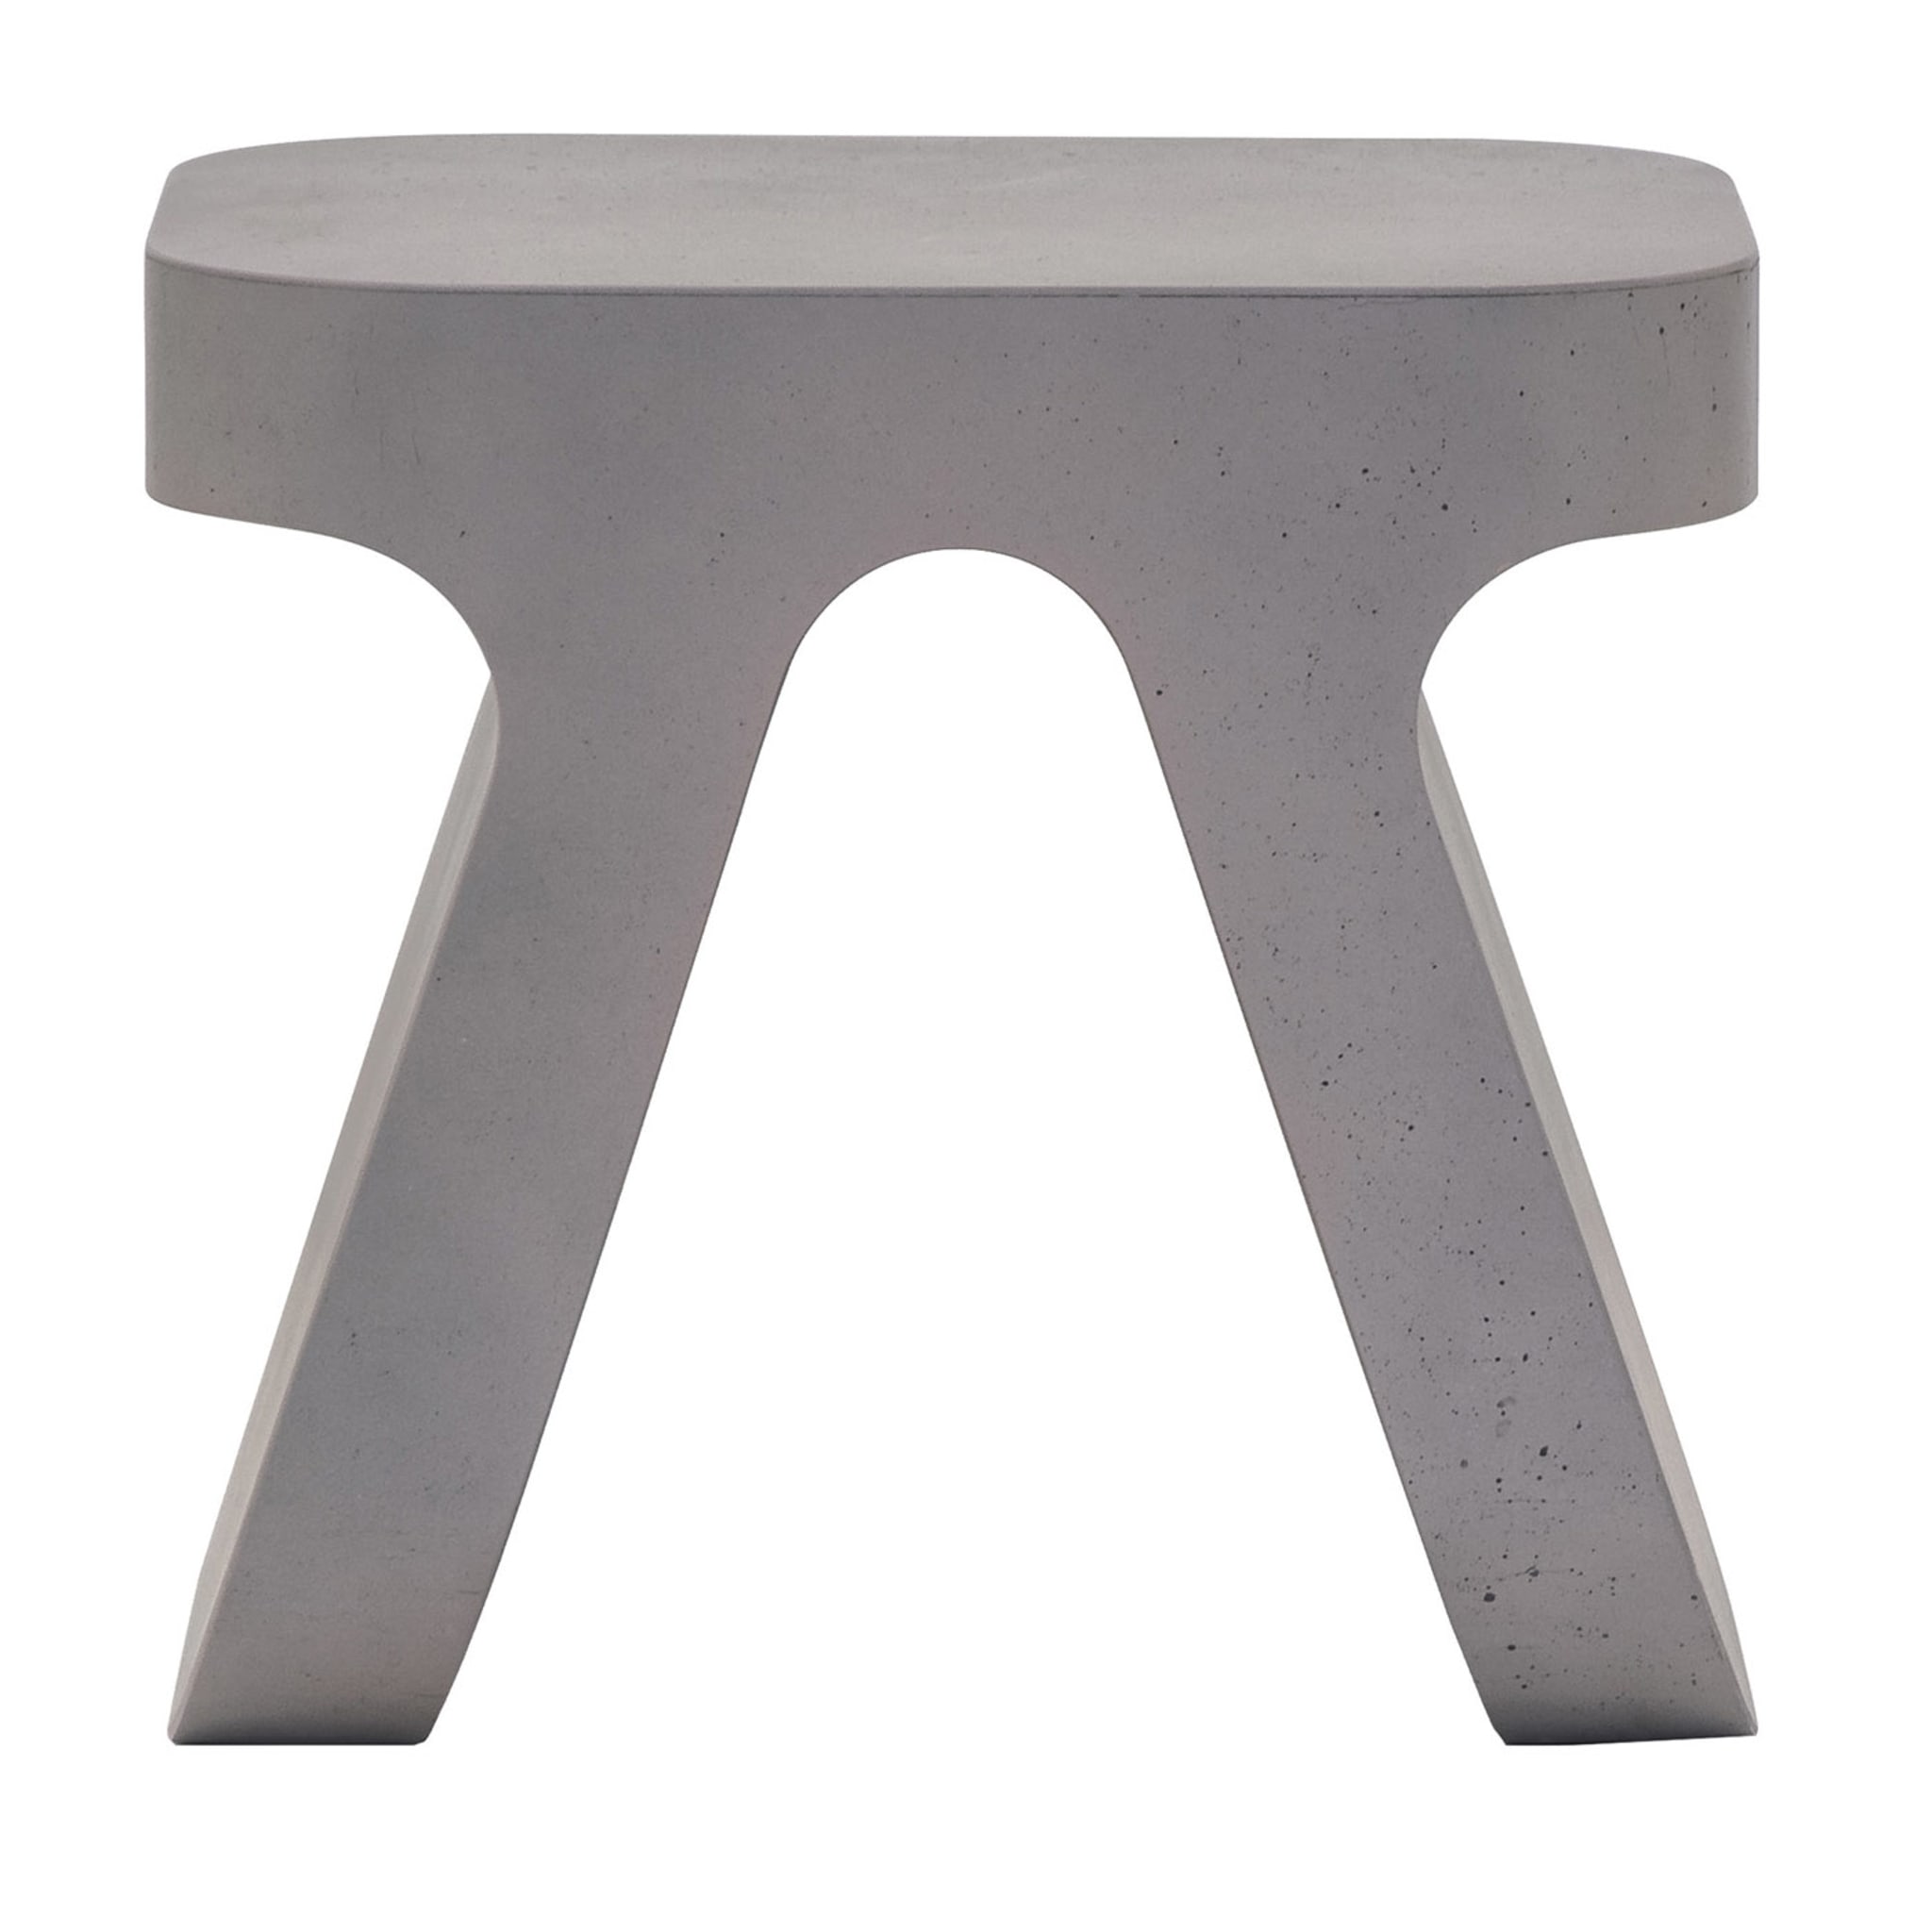 Torcello Stool by Defne Koz and Marco Susani - Main view